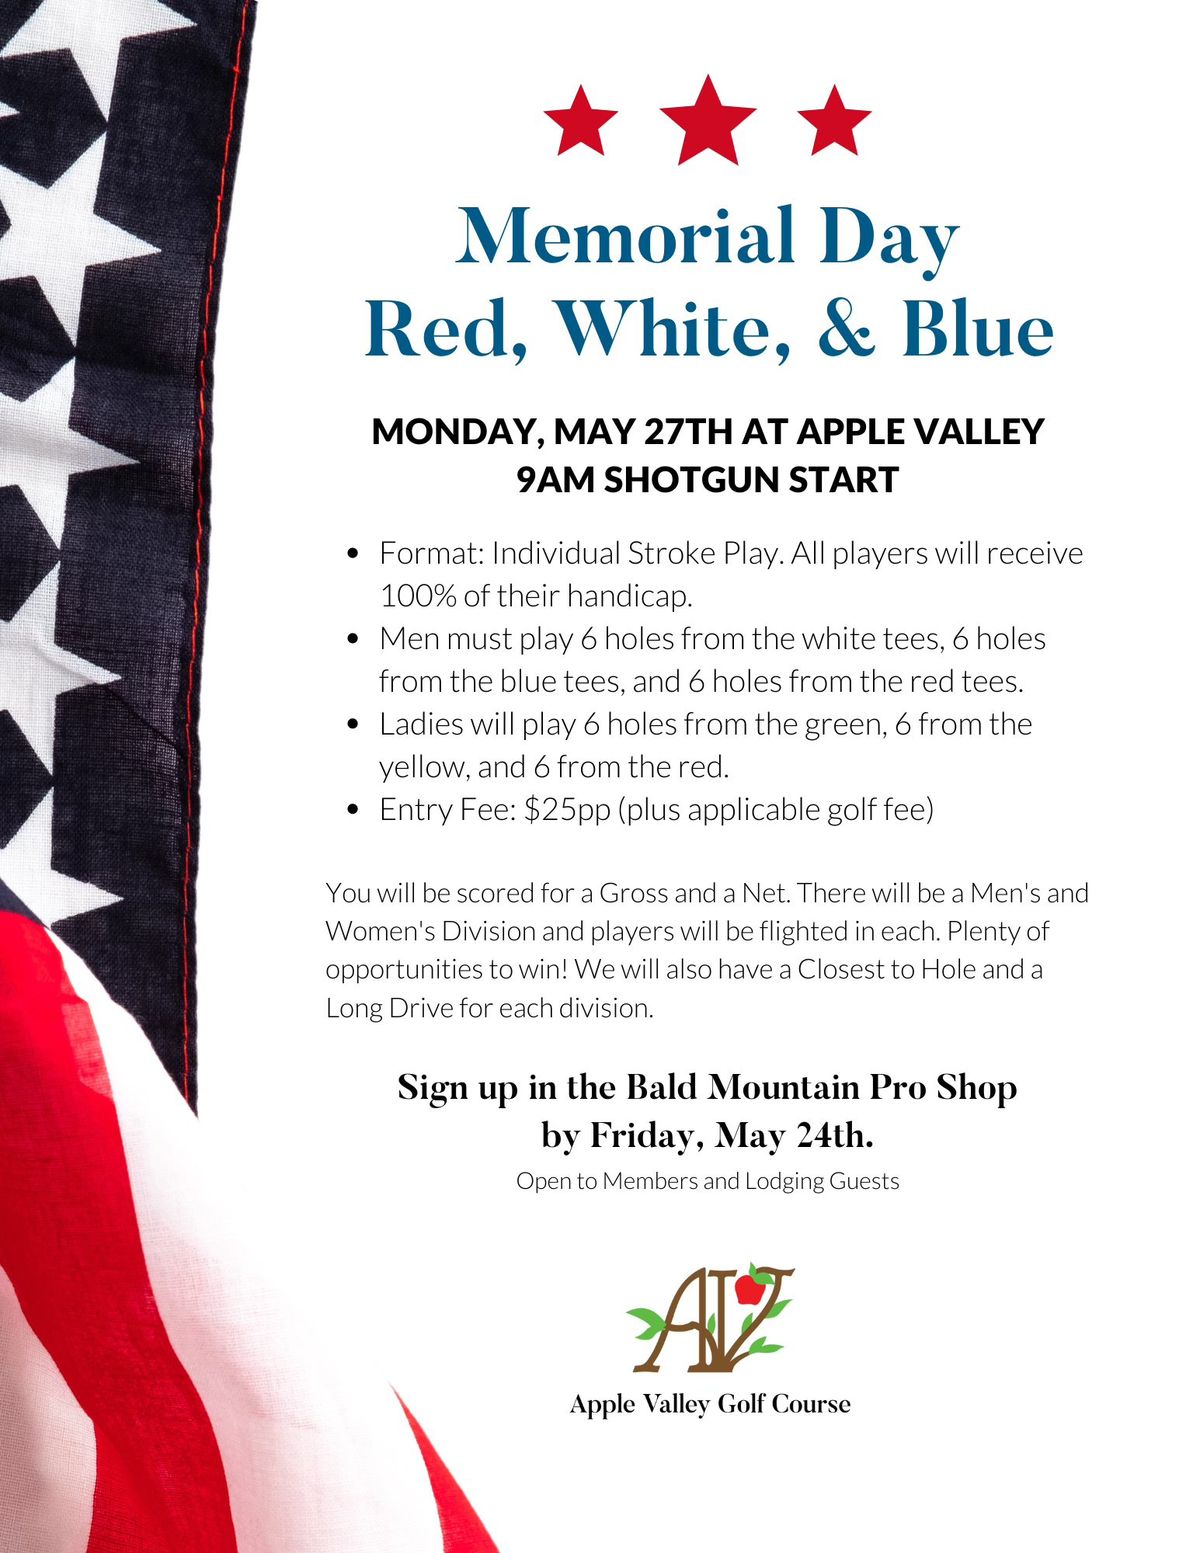 Memorial Day Red, White, & Blue Golf Tournament